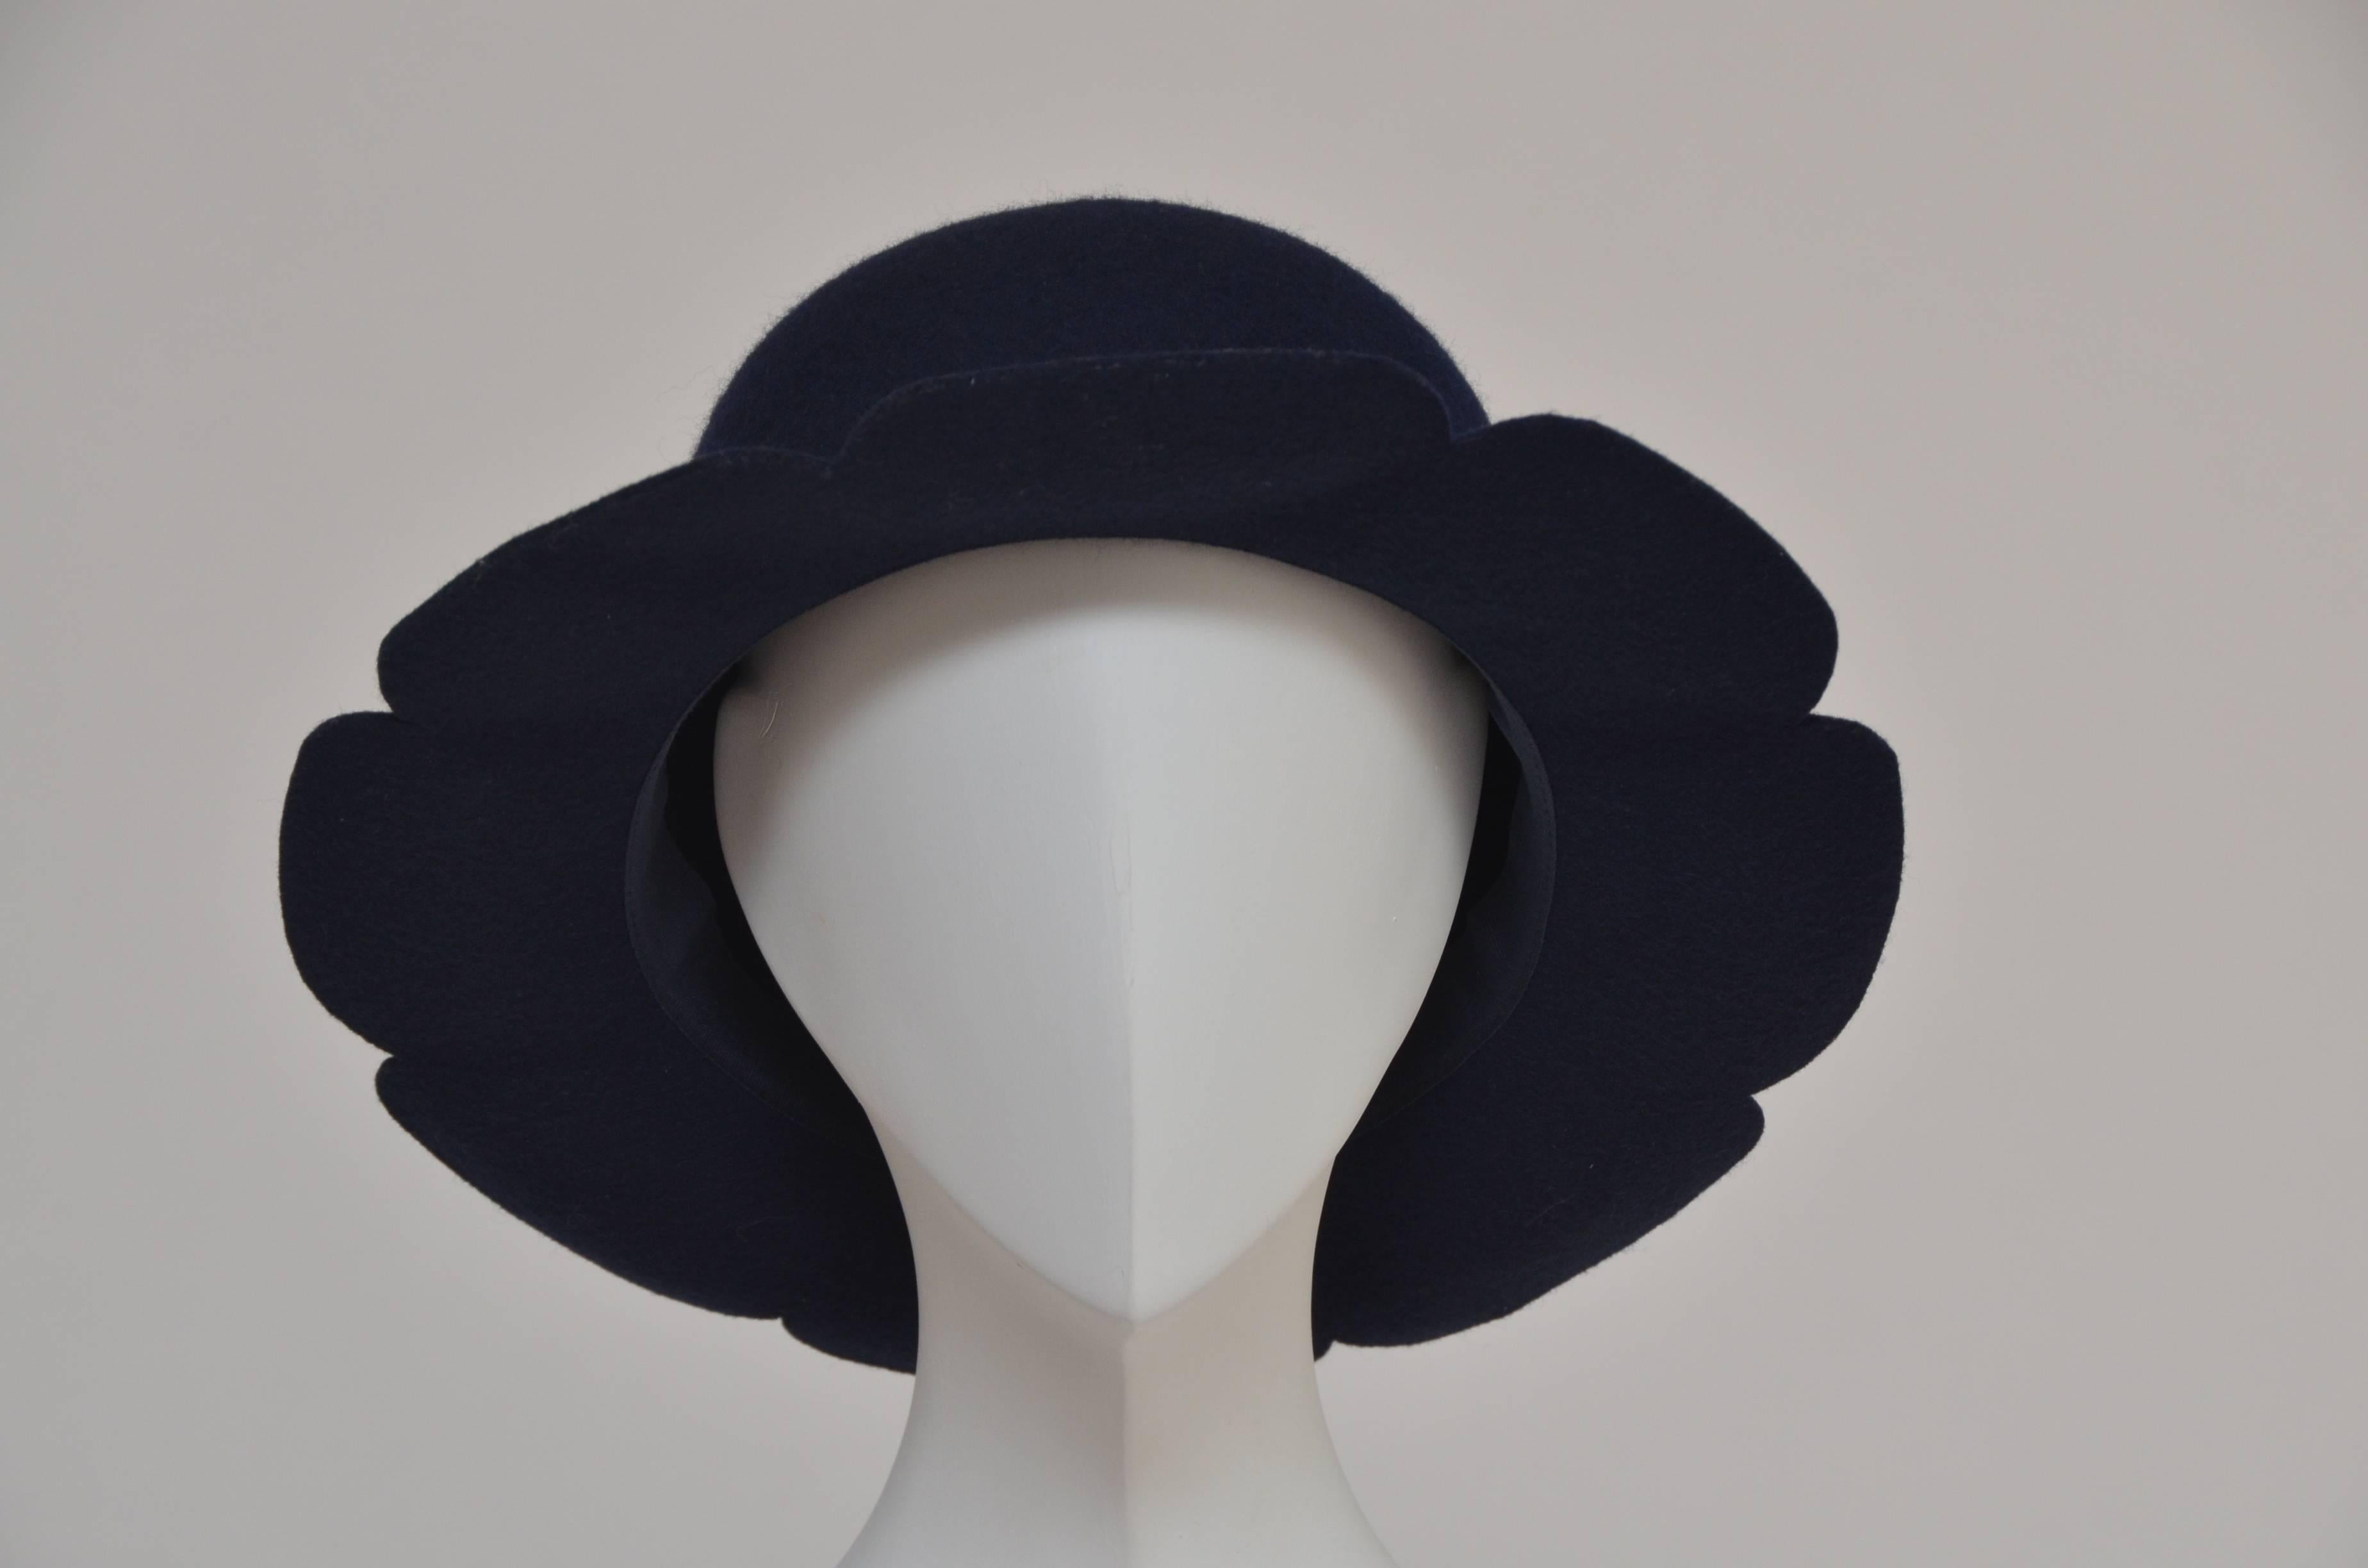 Stephen Jones For Comme Des Garcons Flower Hat 
Mint condition .Possibly never worn.
Dark blue color in person.
Made in France 

Inside measure is about 56.5 to 57